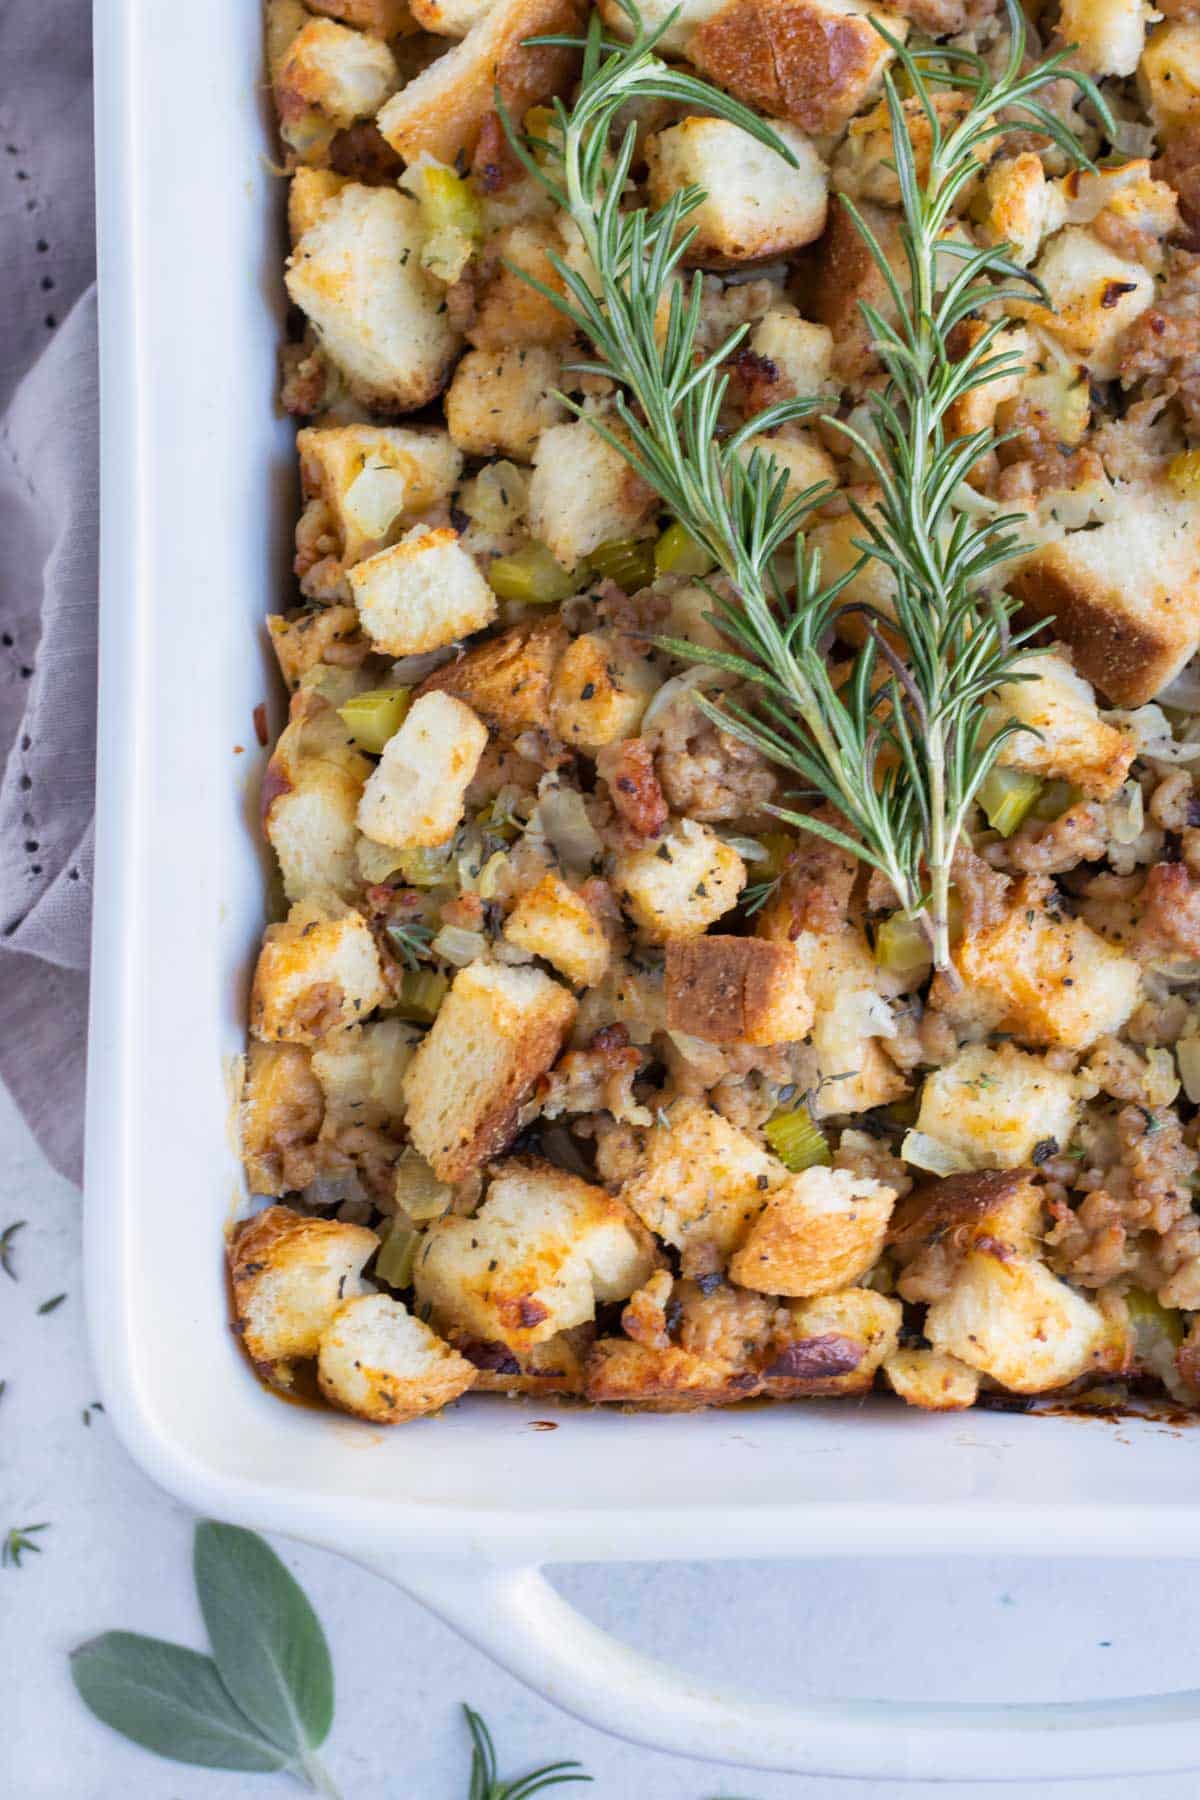 Gluten-free sausage stuffing is topped with fresh herbs before serving.